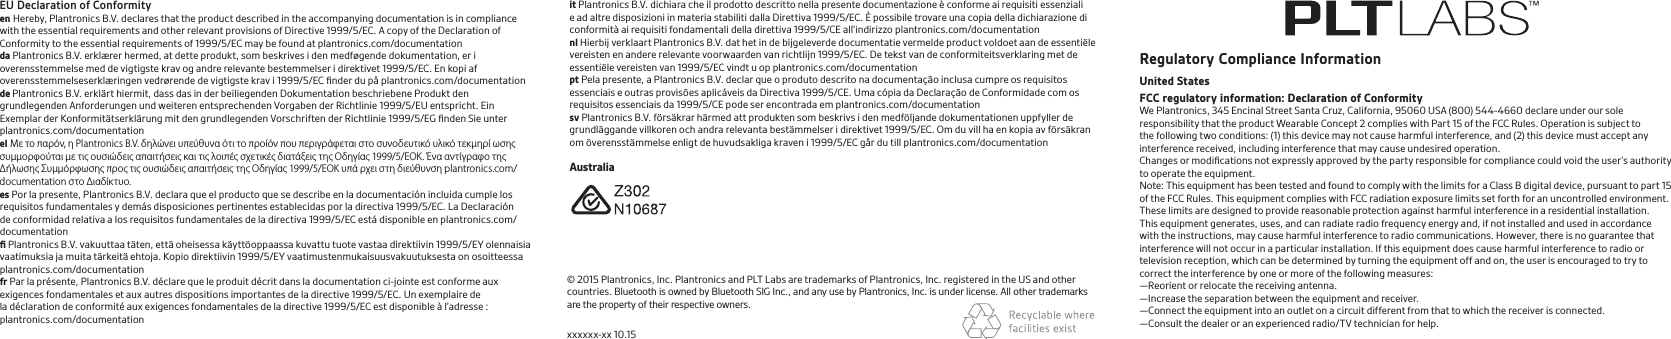 it Plantronics B.V. dichiara che il prodotto descritto nella presente documentazione è conforme ai requisiti essenziali e ad altre disposizioni in materia stabiliti dalla Direttiva 1999/5/EC. È possibile trovare una copia della dichiarazione di conformità ai requisiti fondamentali della direttiva 1999/5/CE all’indirizzo plantronics.com/documentationnl Hierbij verklaart Plantronics B.V. dat het in de bijgeleverde documentatie vermelde product voldoet aan de essentiële vereisten en andere relevante voorwaarden van richtlijn 1999/5/EC. De tekst van de conformiteitsverklaring met de essentiële vereisten van 1999/5/EC vindt u op plantronics.com/documentationpt Pela presente, a Plantronics B.V. declar que o produto descrito na documentação inclusa cumpre os requisitos essenciais e outras provisões aplicáveis da Directiva 1999/5/CE. Uma cópia da Declaração de Conformidade com os requisitos essenciais da 1999/5/CE pode ser encontrada em plantronics.com/documentationsv Plantronics B.V. försäkrar härmed att produkten som beskrivs i den medföljande dokumentationen uppfyller de grundläggande villkoren och andra relevanta bestämmelser i direktivet 1999/5/EC. Om du vill ha en kopia av försäkran om överensstämmelse enligt de huvudsakliga kraven i 1999/5/EC går du till plantronics.com/documentationRegulatory Compliance InformationUnited StatesFCC regulatory information: Declaration of ConformityWe Plantronics, 345 Encinal Street Santa Cruz, California, 95060 USA (800) 544-4660 declare under our sole responsibility that the product Wearable Concept 2 complies with Part 15 of the FCC Rules. Operation is subject to the following two conditions: (1) this device may not cause harmful interference, and (2) this device must accept any interference received, including interference that may cause undesired operation. Changes or modiﬁcations not expressly approved by the party responsible for compliance could void the user’s authority to operate the equipment. Note: This equipment has been tested and found to comply with the limits for a Class B digital device, pursuant to part 15 of the FCC Rules. This equipment complies with FCC radiation exposure limits set forth for an uncontrolled environment. These limits are designed to provide reasonable protection against harmful interference in a residential installation. This equipment generates, uses, and can radiate radio frequency energy and, if not installed and used in accordance with the instructions, may cause harmful interference to radio communications. However, there is no guarantee that interference will not occur in a particular installation. If this equipment does cause harmful interference to radio or television reception, which can be determined by turning the equipment off and on, the user is encouraged to try to correct the interference by one or more of the following measures: —Reorient or relocate the receiving antenna. —Increase the separation between the equipment and receiver. —Connect the equipment into an outlet on a circuit different from that to which the receiver is connected. —Consult the dealer or an experienced radio/TV technician for help.© 2015 Plantronics, Inc. Plantronics and PLT Labs are trademarks of Plantronics, Inc. registered in the US and other countries. Bluetooth is owned by Bluetooth SIG Inc., and any use by Plantronics, Inc. is under license. All other trademarks are the property of their respective owners.xxxxxx-xx 10.15    AustraliaEU Declaration of Conformityen Hereby, Plantronics B.V. declares that the product described in the accompanying documentation is in compliance with the essential requirements and other relevant provisions of Directive 1999/5/EC. A copy of the Declaration of Conformity to the essential requirements of 1999/5/EC may be found at plantronics.com/documentationda Plantronics B.V. erklærer hermed, at dette produkt, som beskrives i den medføgende dokumentation, er i overensstemmelse med de vigtigste krav og andre relevante bestemmelser i direktivet 1999/5/EC. En kopi af overensstemmelseserklæringen vedrørende de vigtigste krav i 1999/5/EC ﬁnder du på plantronics.com/documentationde Plantronics B.V. erklärt hiermit, dass das in der beiliegenden Dokumentation beschriebene Produkt den grundlegenden Anforderungen und weiteren entsprechenden Vorgaben der Richtlinie 1999/5/EU entspricht. Ein Exemplar der Konformitätserklärung mit den grundlegenden Vorschriften der Richtlinie 1999/5/EG ﬁnden Sie unter plantronics.com/documentationel Με το παρόν, η Plantronics B.V. δηλώνει υπεύθυνα ότι το προίόν που περιγράφεται στο συνοδευτικό υλικό τεκμηρί ωσης συμμορφούται με τις ουσιώδεις απαιτήσεις και τις λοιπές σχετικές διατάξεις της Οδηγίας 1999/5/ΕΟΚ. Ένα αντίγραφο της Δήλωσης Συμμόρφωσης προς τις ουσιώδεις απαιτήσεις της Οδηγίας 1999/5/ΕΟΚ υπά ρχει στη διεύθυνση plantronics.com/documentation στο Διαδίκτυο.es Por la presente, Plantronics B.V. declara que el producto que se describe en la documentación incluida cumple los requisitos fundamentales y demás disposiciones pertinentes establecidas por la directiva 1999/5/EC. La Declaración de conformidad relativa a los requisitos fundamentales de la directiva 1999/5/EC está disponible en plantronics.com/documentationﬁ Plantronics B.V. vakuuttaa täten, että oheisessa käyttöoppaassa kuvattu tuote vastaa direktiivin 1999/5/EY olennaisia vaatimuksia ja muita tärkeitä ehtoja. Kopio direktiivin 1999/5/EY vaatimustenmukaisuusvakuutuksesta on osoitteessa plantronics.com/documentationfr Par la présente, Plantronics B.V. déclare que le produit décrit dans la documentation ci-jointe est conforme aux exigences fondamentales et aux autres dispositions importantes de la directive 1999/5/EC. Un exemplaire de la déclaration de conformité aux exigences fondamentales de la directive 1999/5/EC est disponible à l’adresse : plantronics.com/documentation